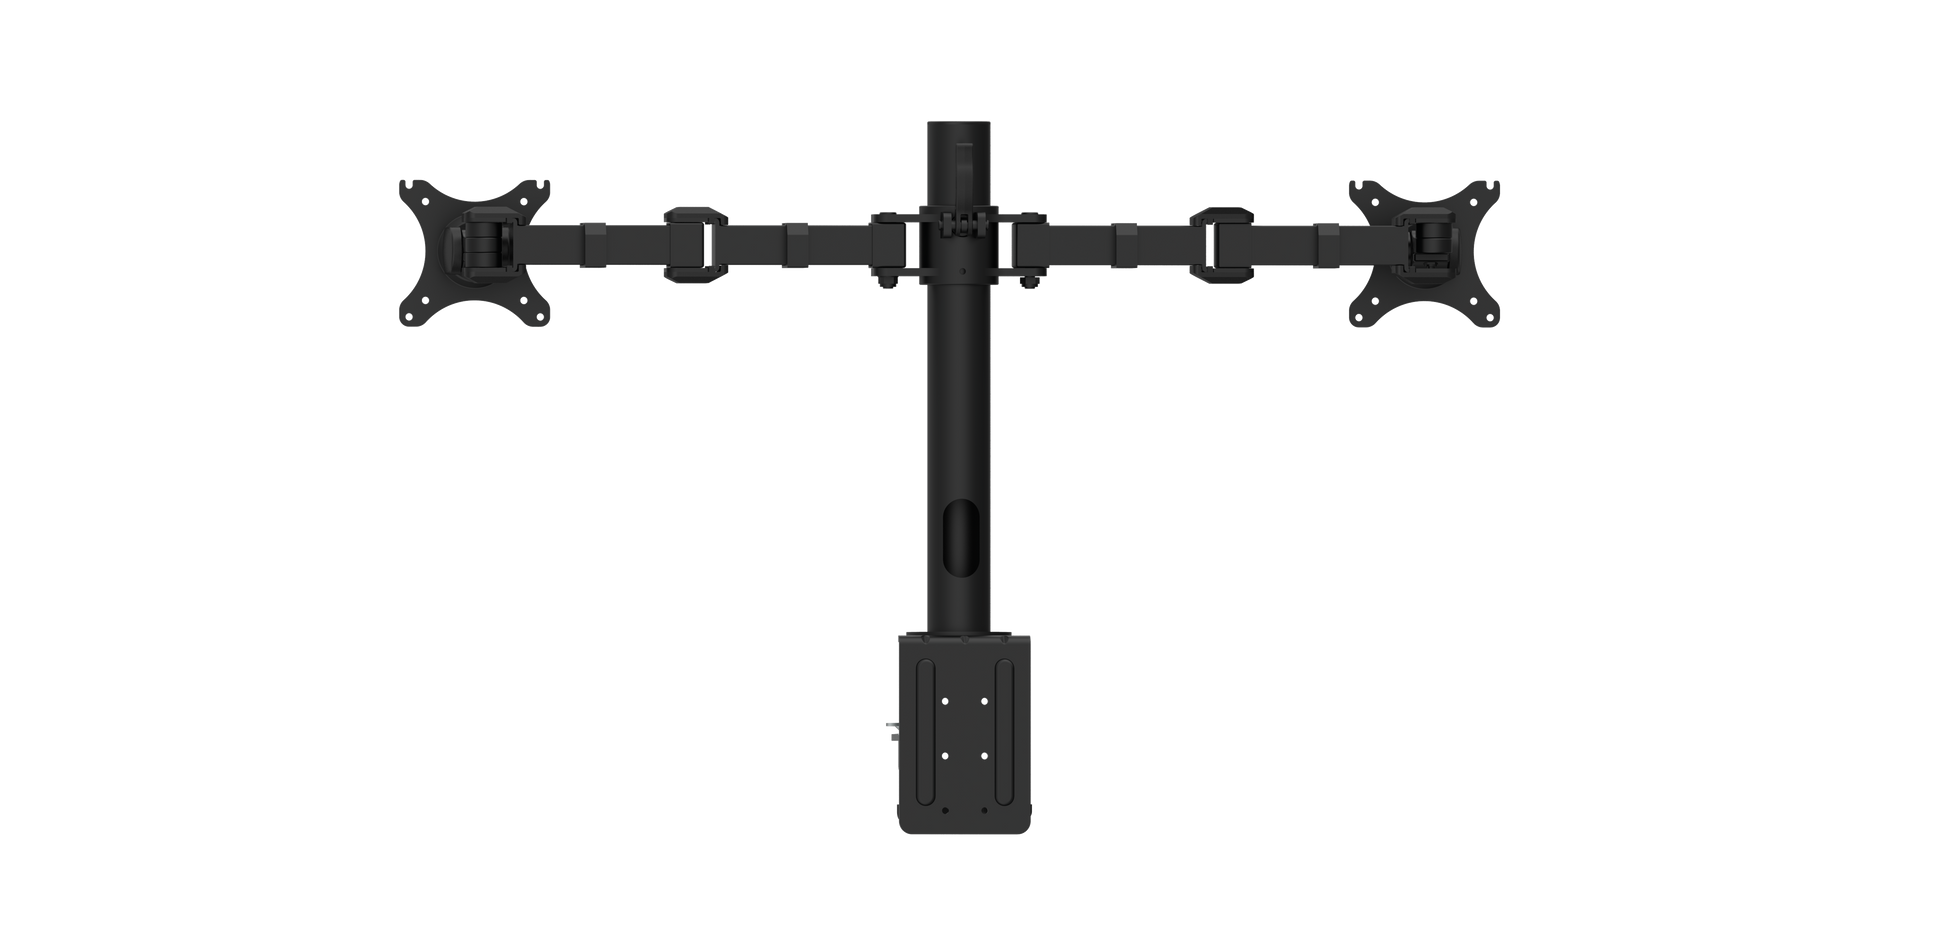 Buy Rapidline Revolve Dual Monitor Arm FREE SHIPPING RMA2 BL Perfect to use with our range of Standing Desks and Desk Converters! Liberate your worktop space and improve posture with a Revolve pole mounted dual monitor arm. With 360 degrees horizontal adjustment and cable management within the pole, available in black